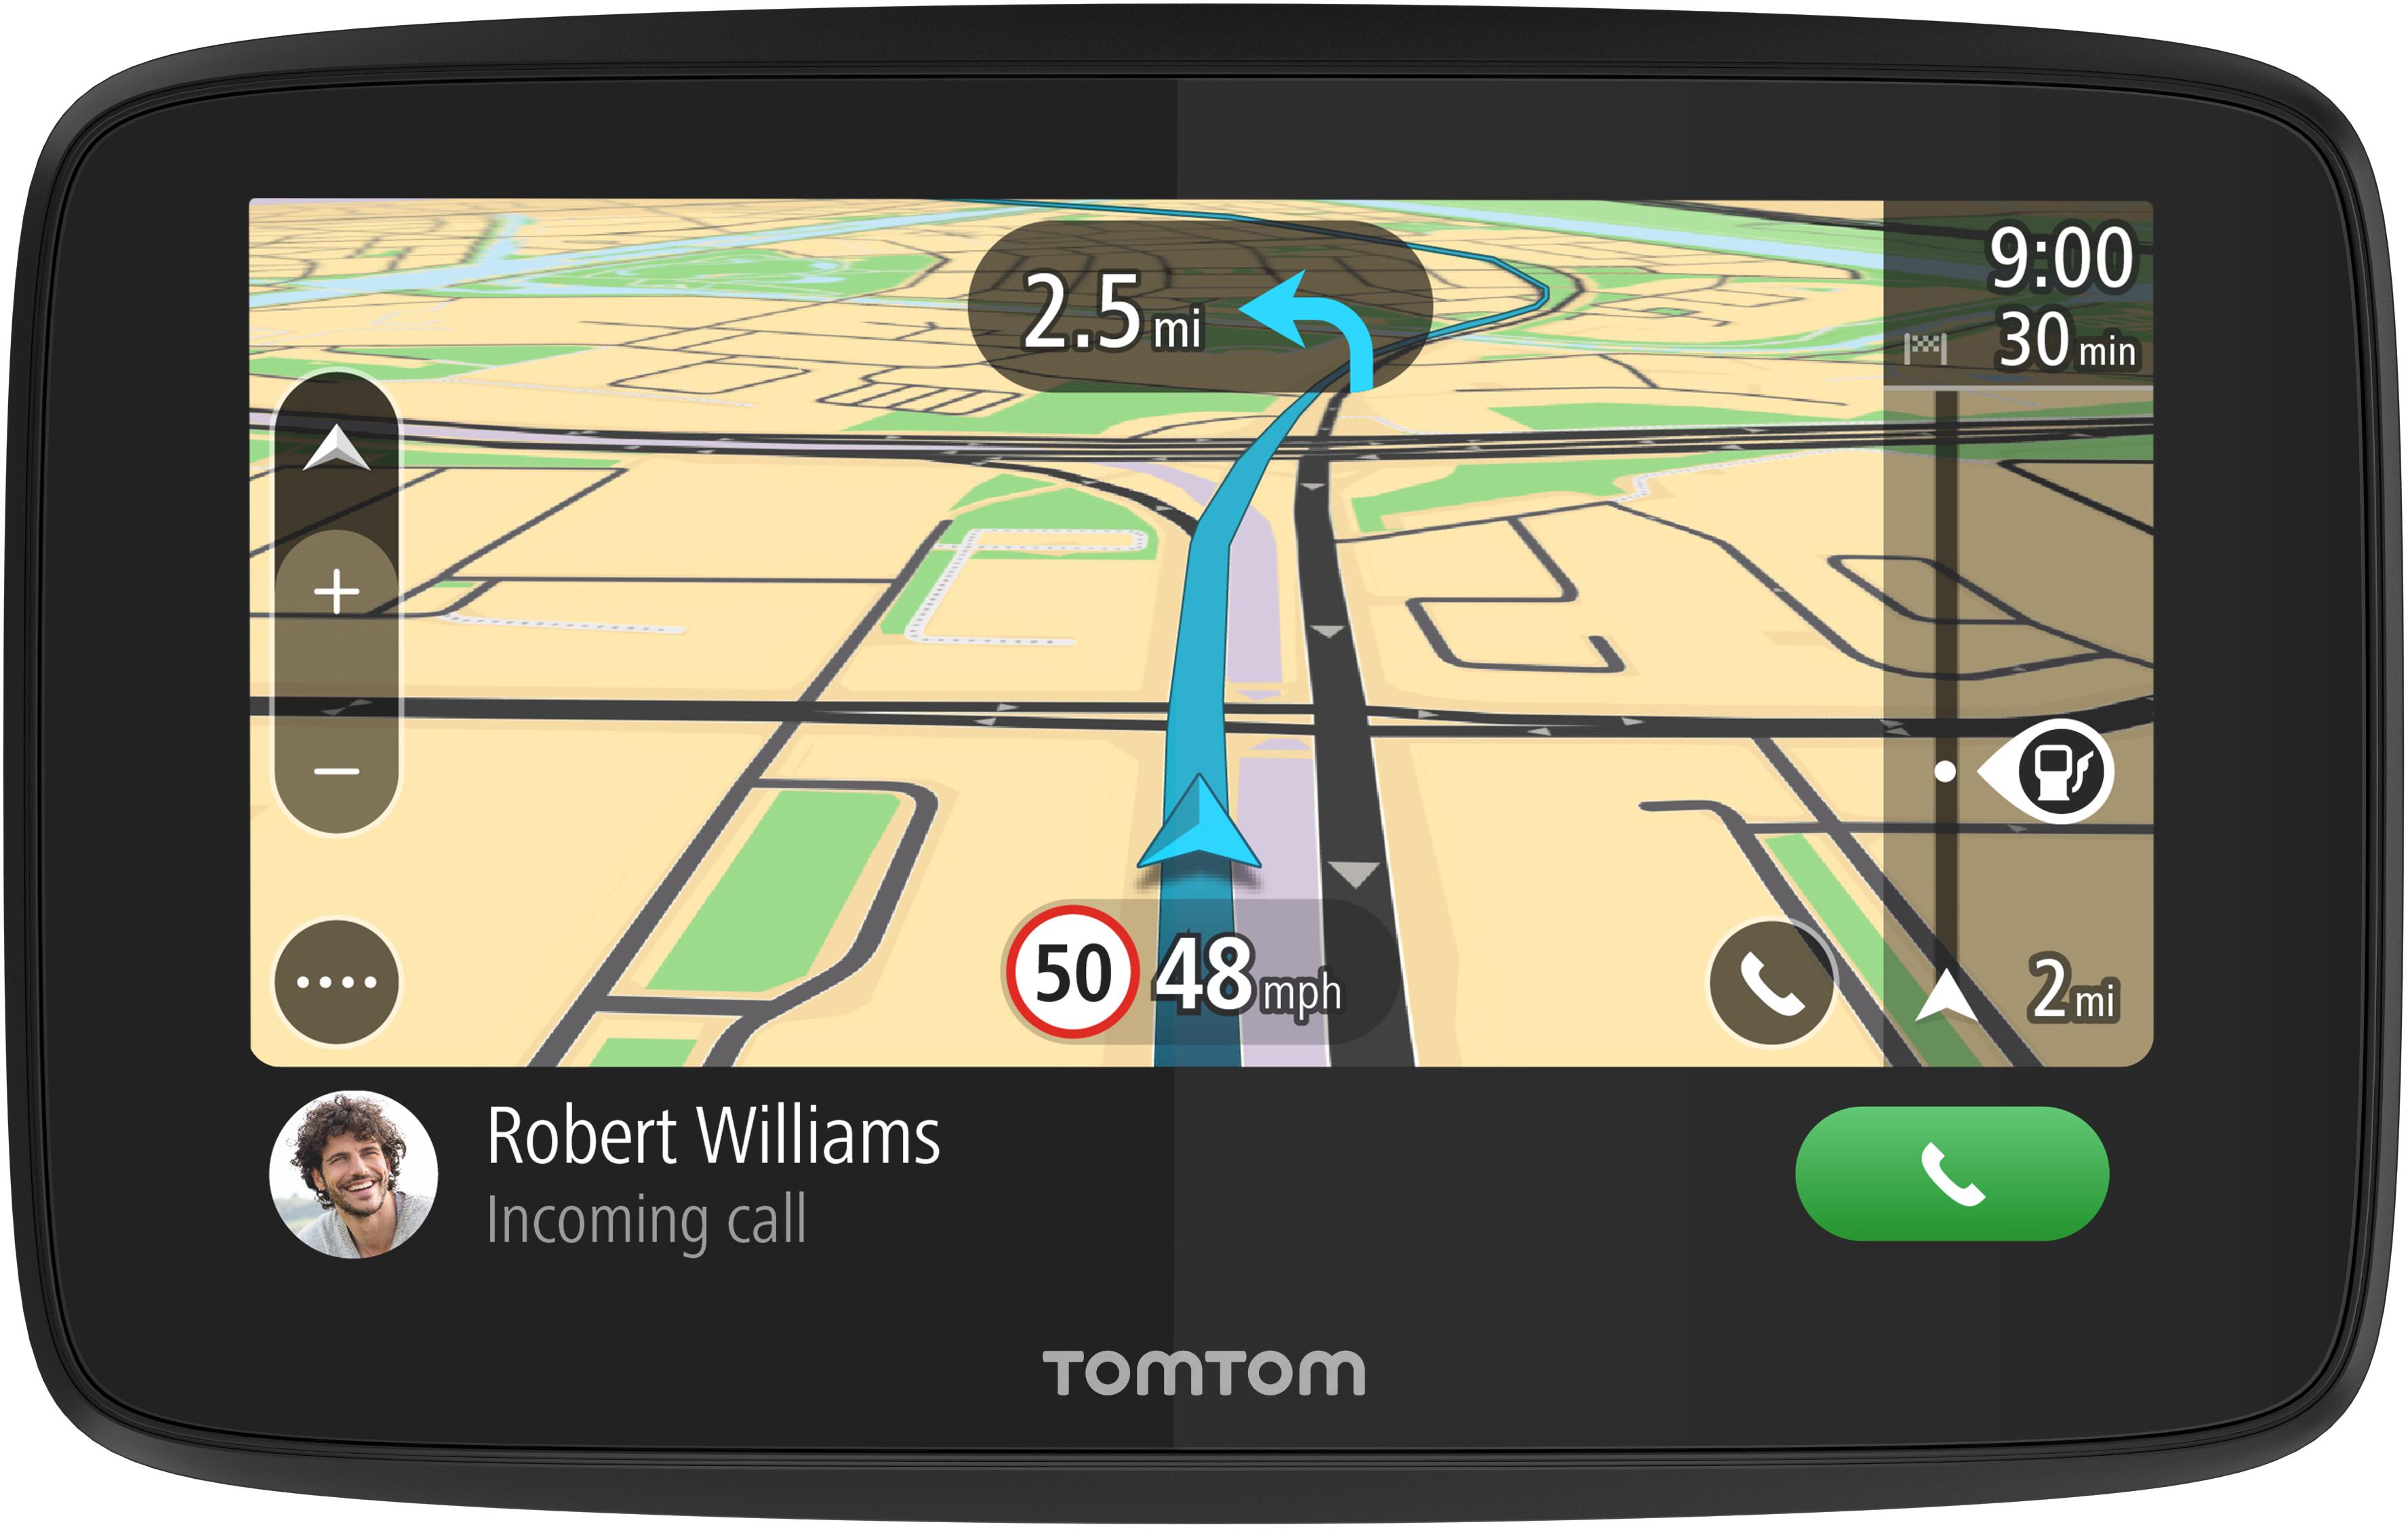 Refurbished Tomtom Go 520 With Wi-Fi, European Maps And Smartphone Enabled Tomtom Traffic - Grade B